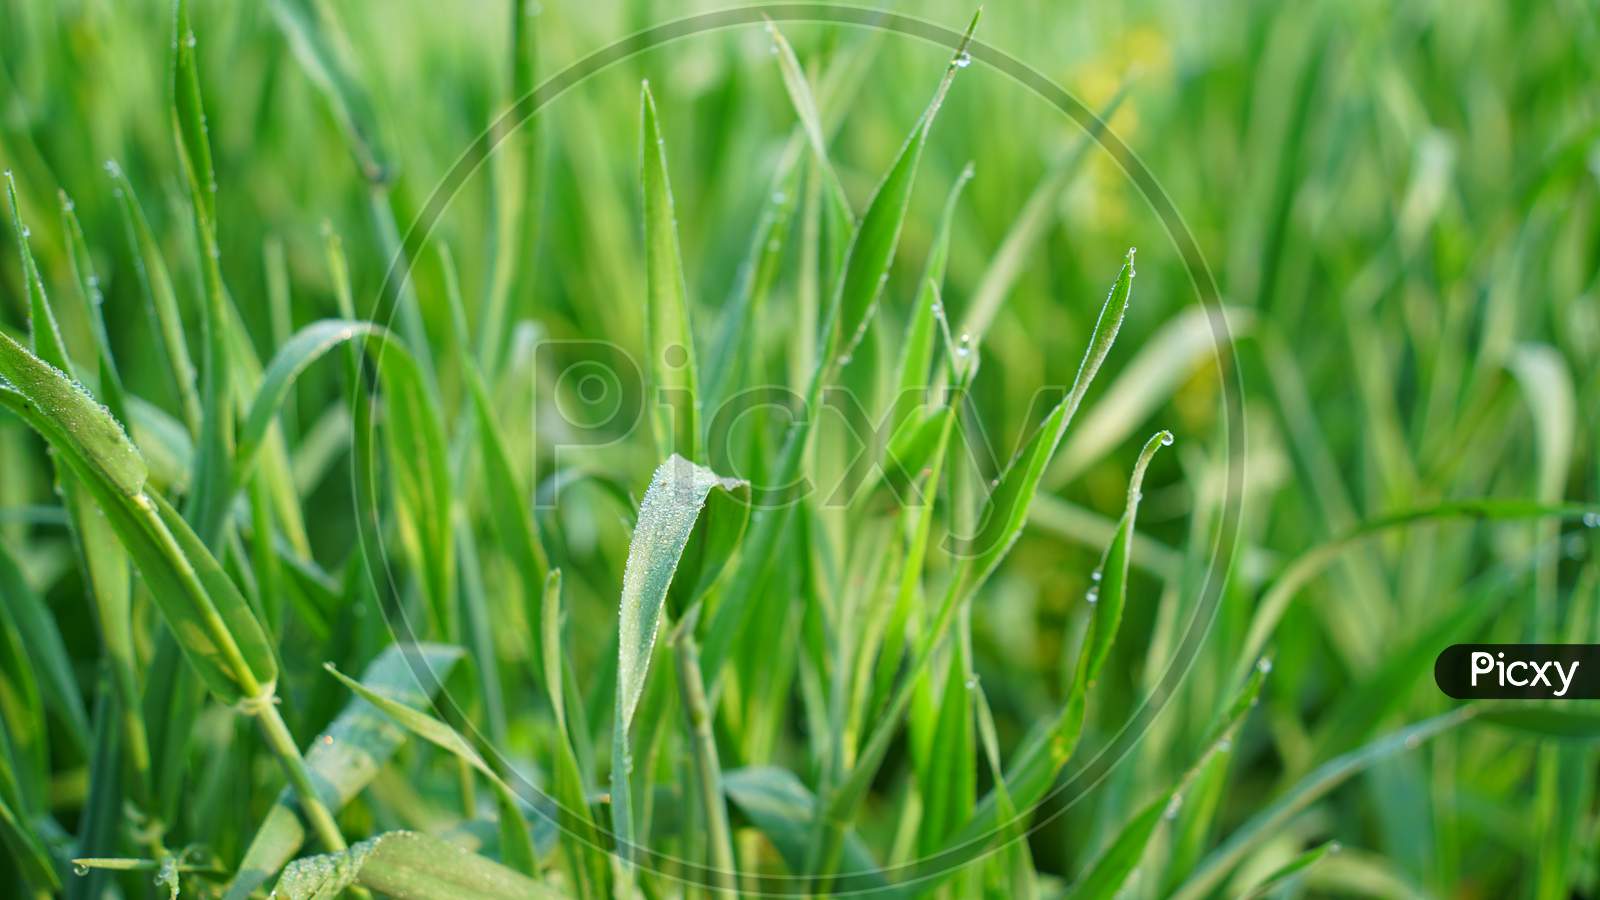 Stem Of Wheat Plants With Light Misty Fog On The Leaves. Growing Filament Or Triticale In The Agricultral Field.